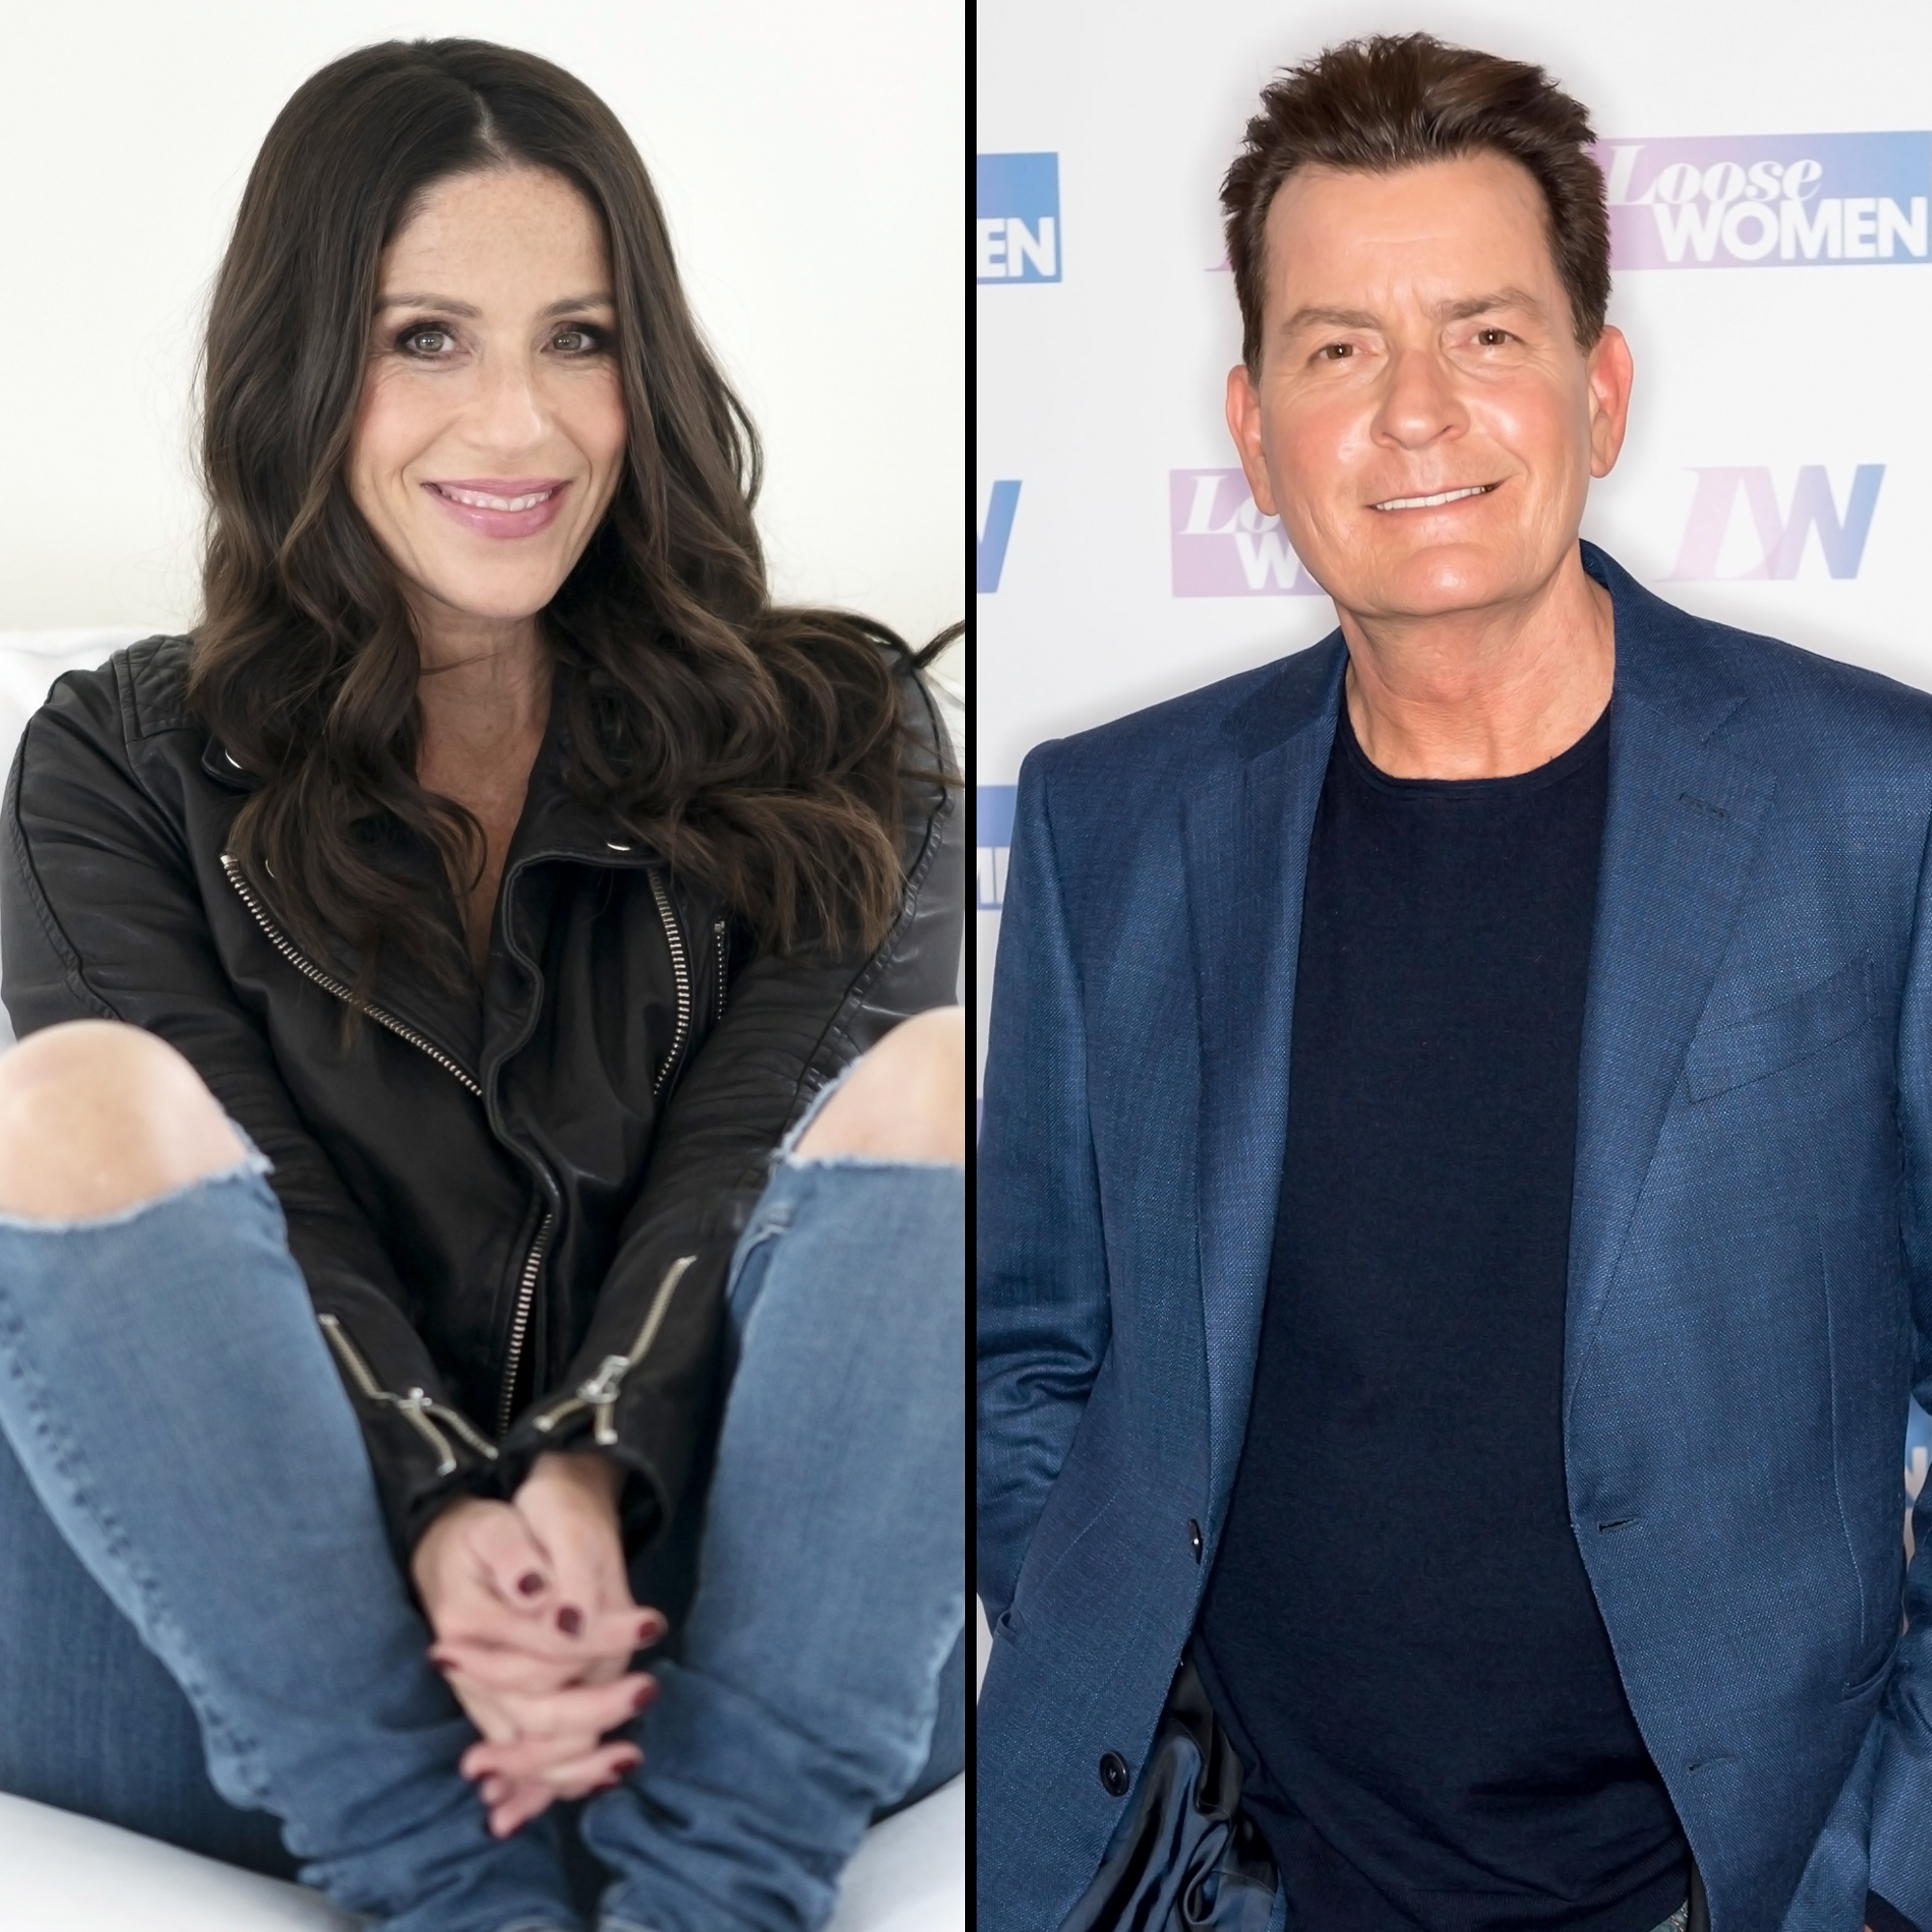 Soleil Moon Frye Gives Charlie Sheen Update After Documentary